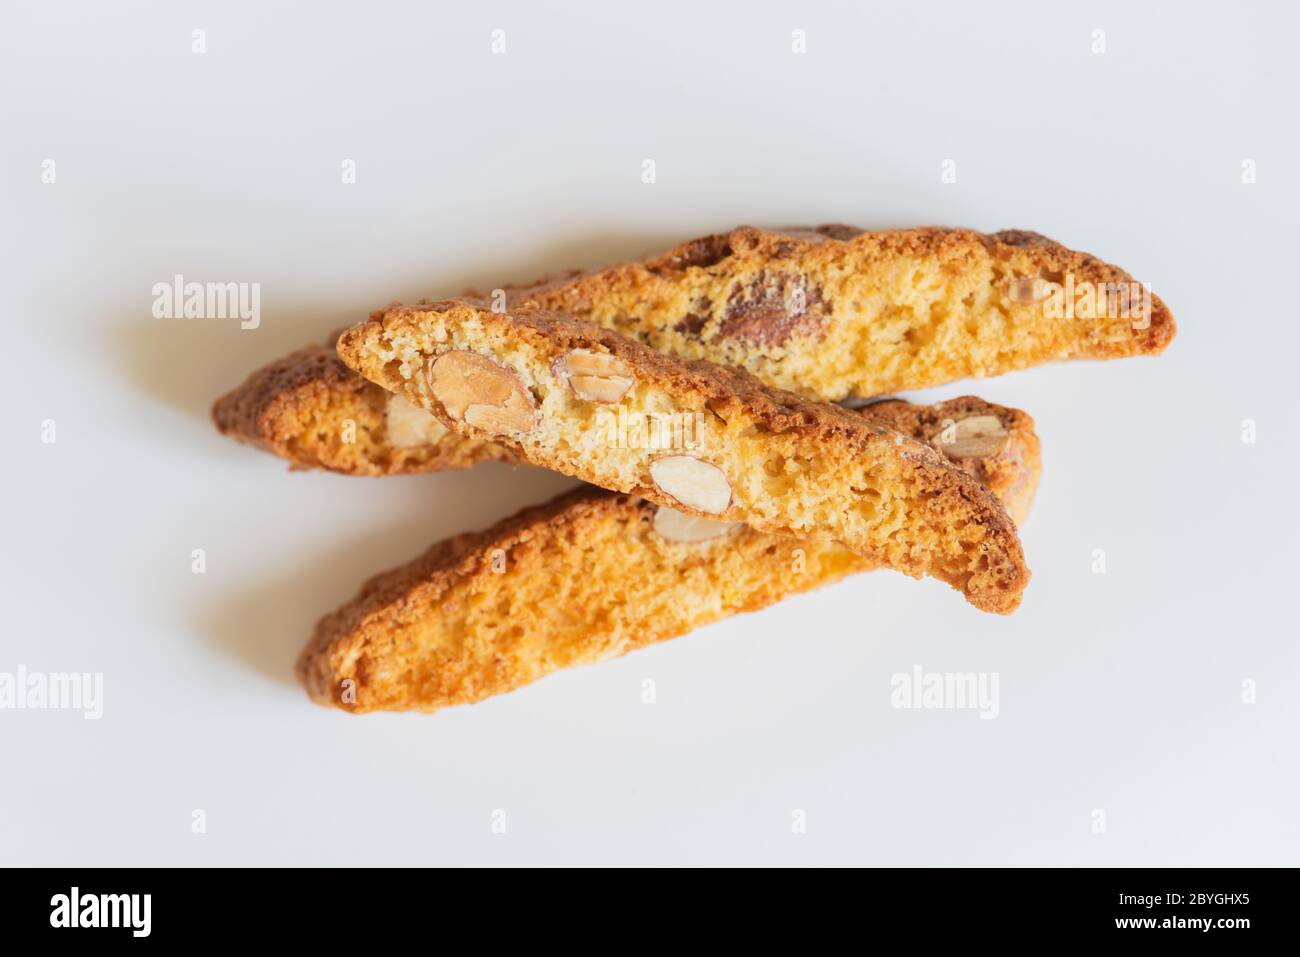 Cantucci maison avec amandes sur fond clair. Biscotti toscan. cantuccini traditionnel. Biscuits italiens (biscuits). Italien Banque D'Images